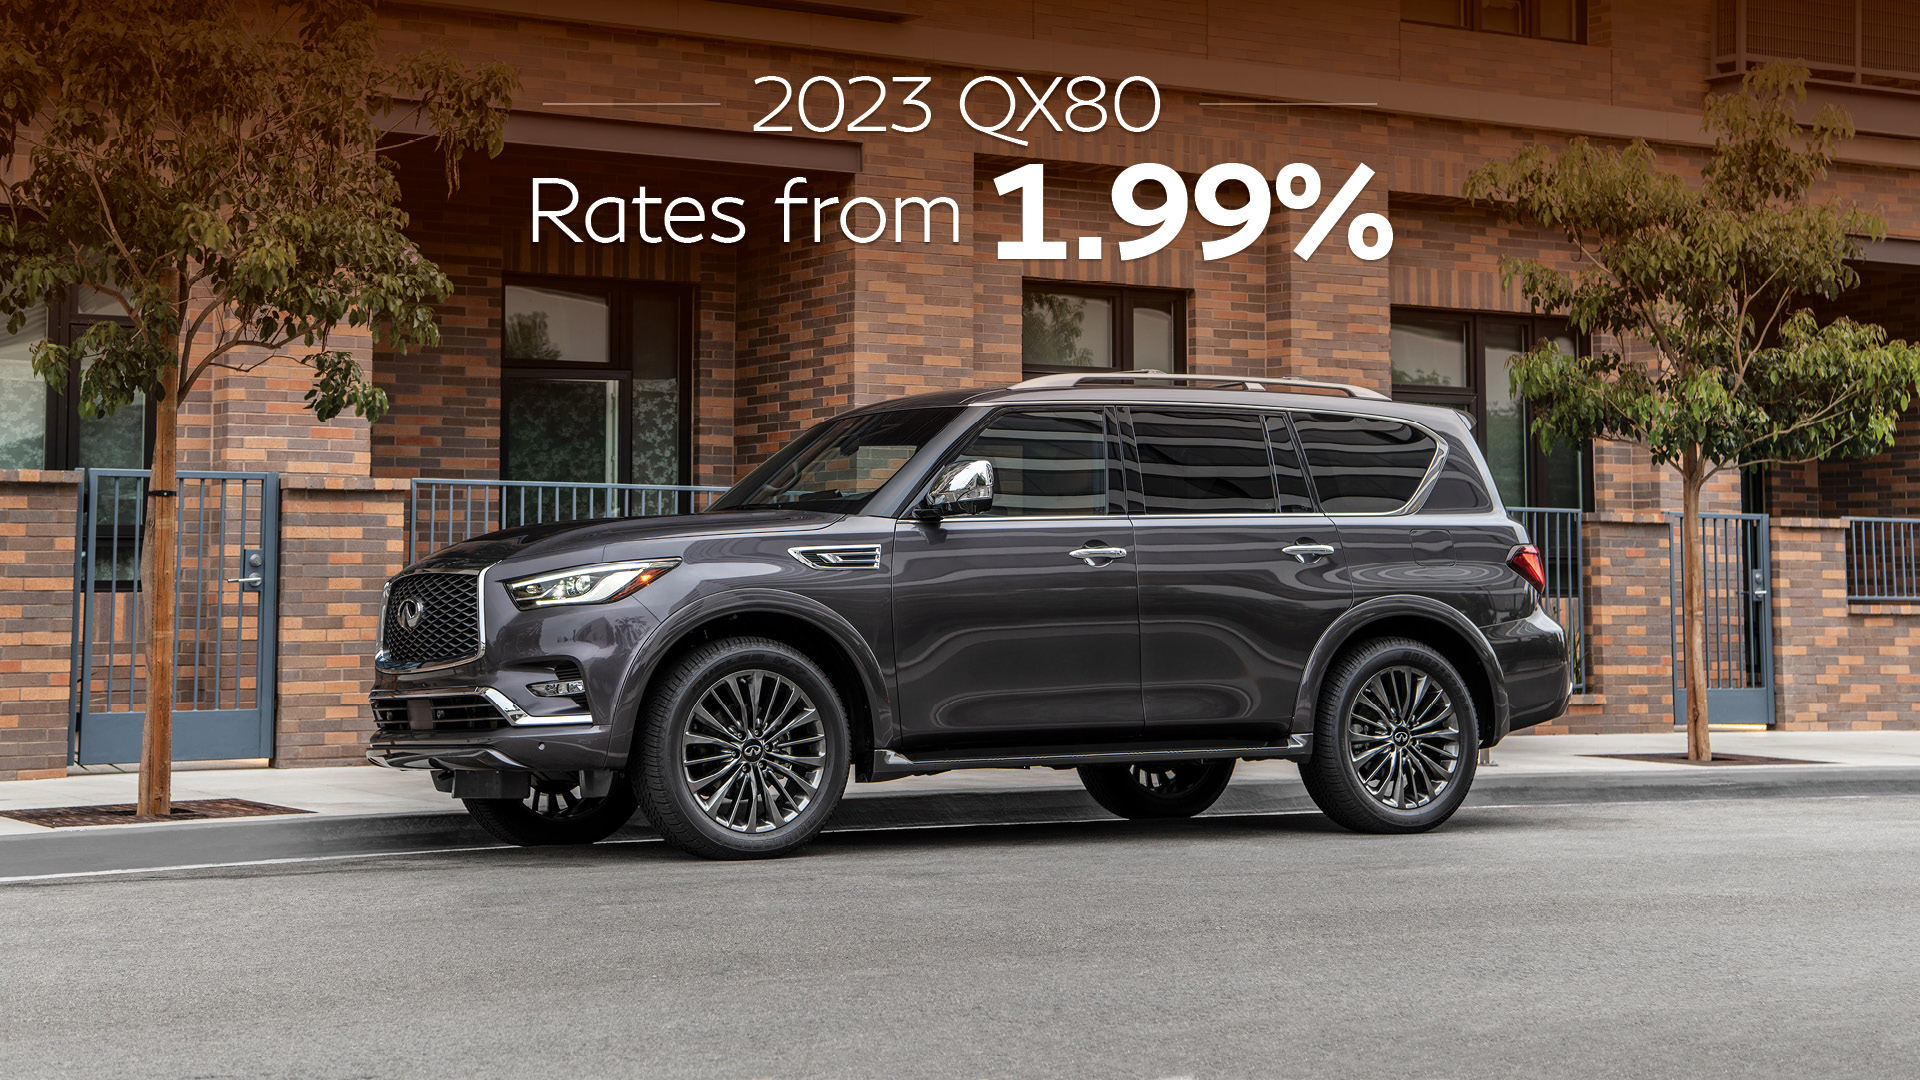 Infiniti QX80 2023 | Rates from 1.99%